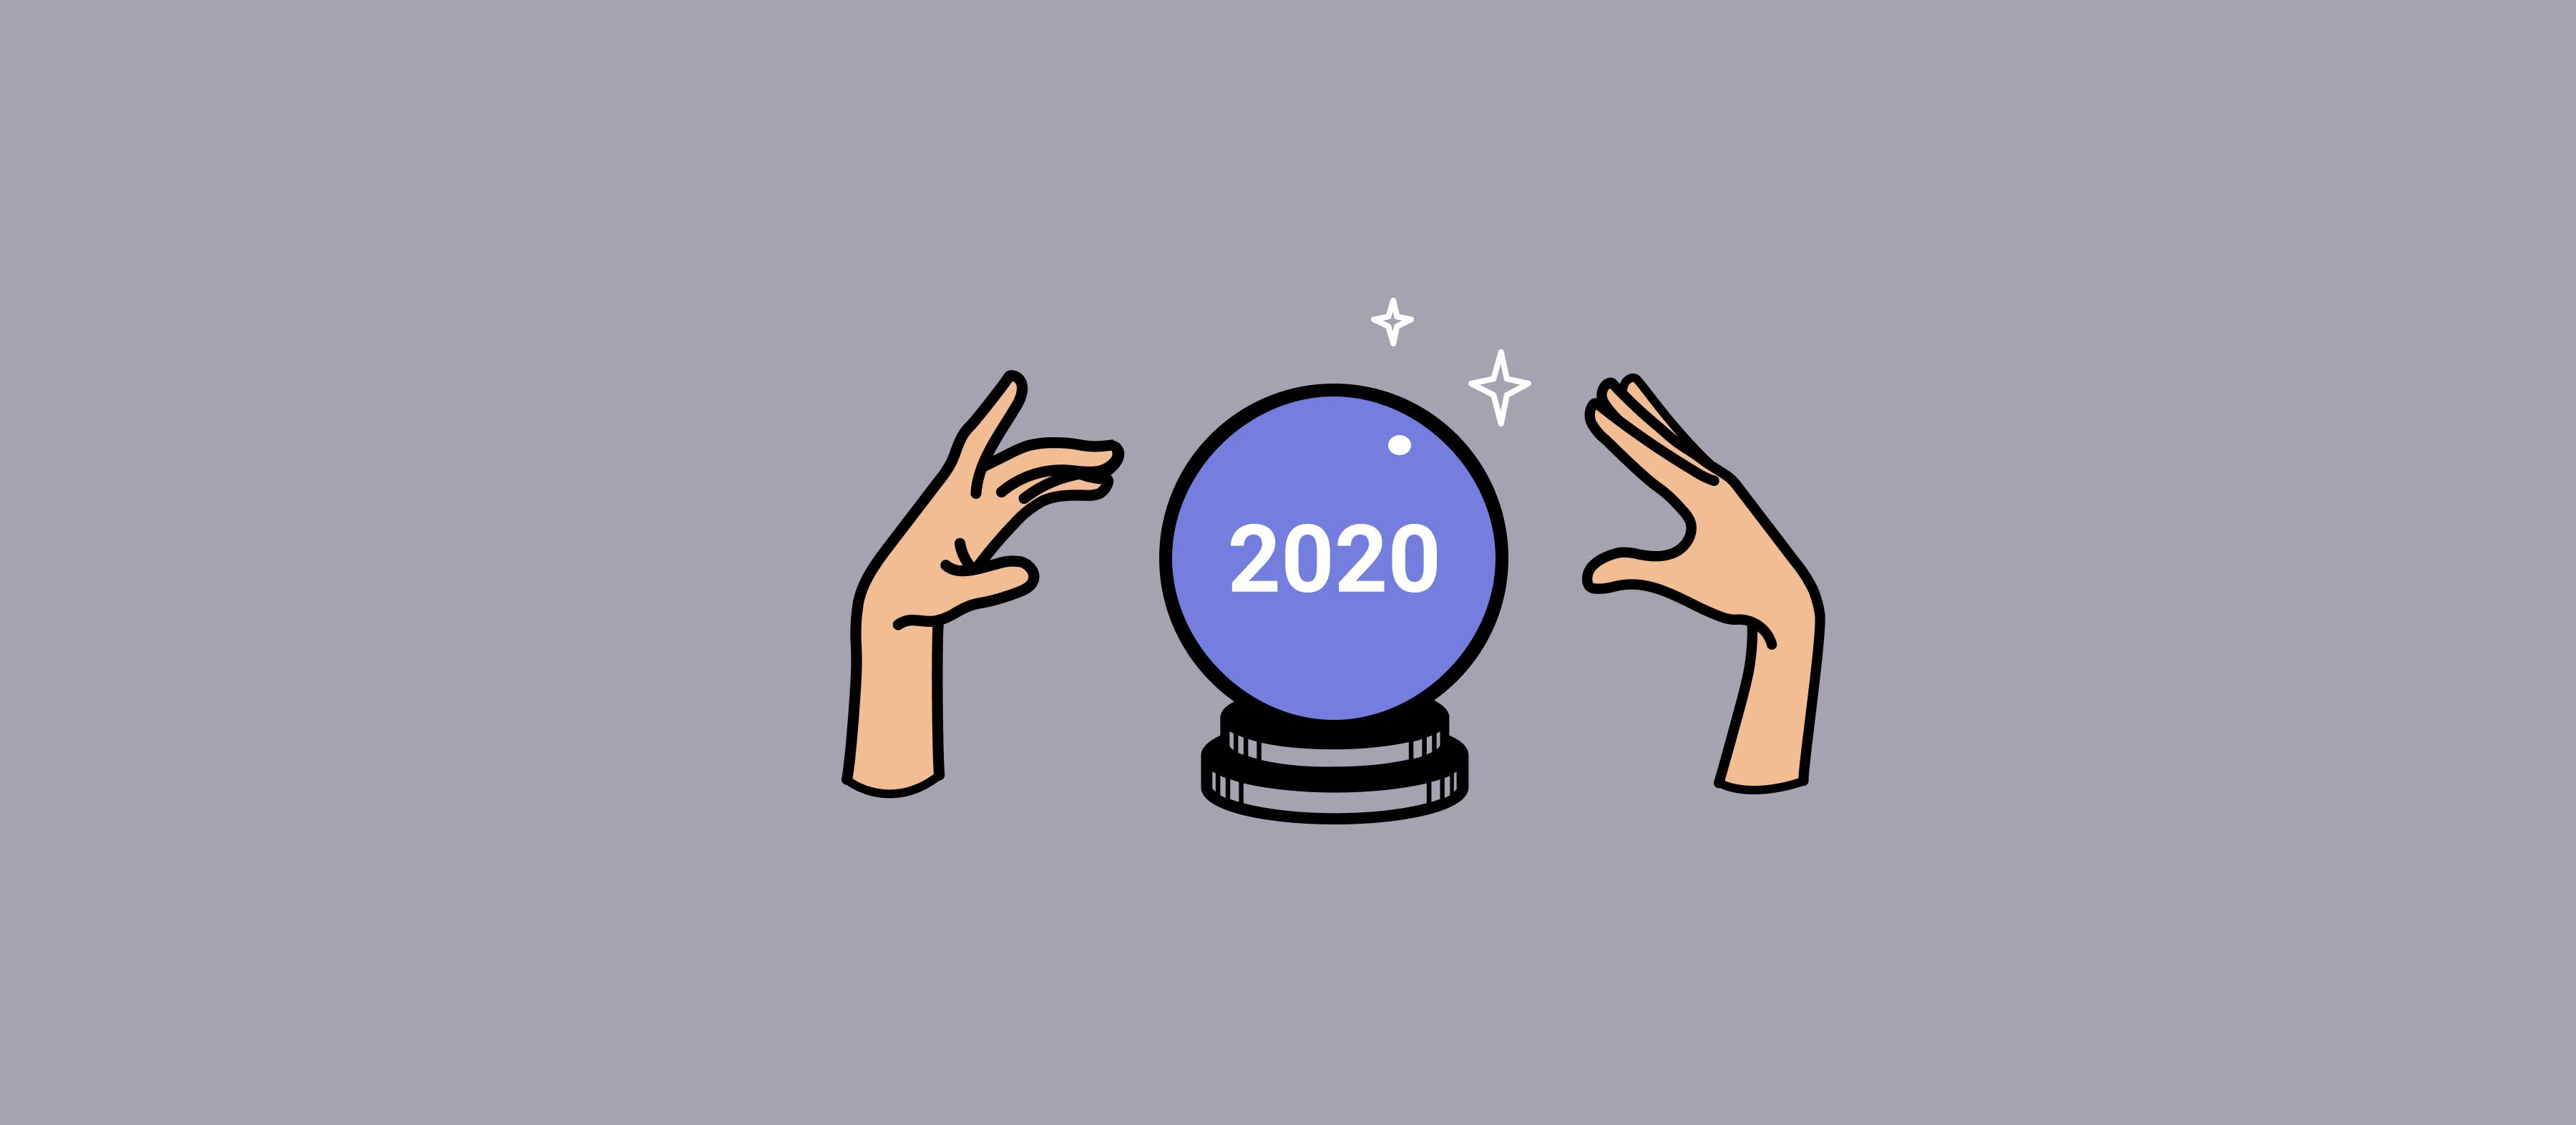 Top Cryptocurrencies Price Prediction For 2020